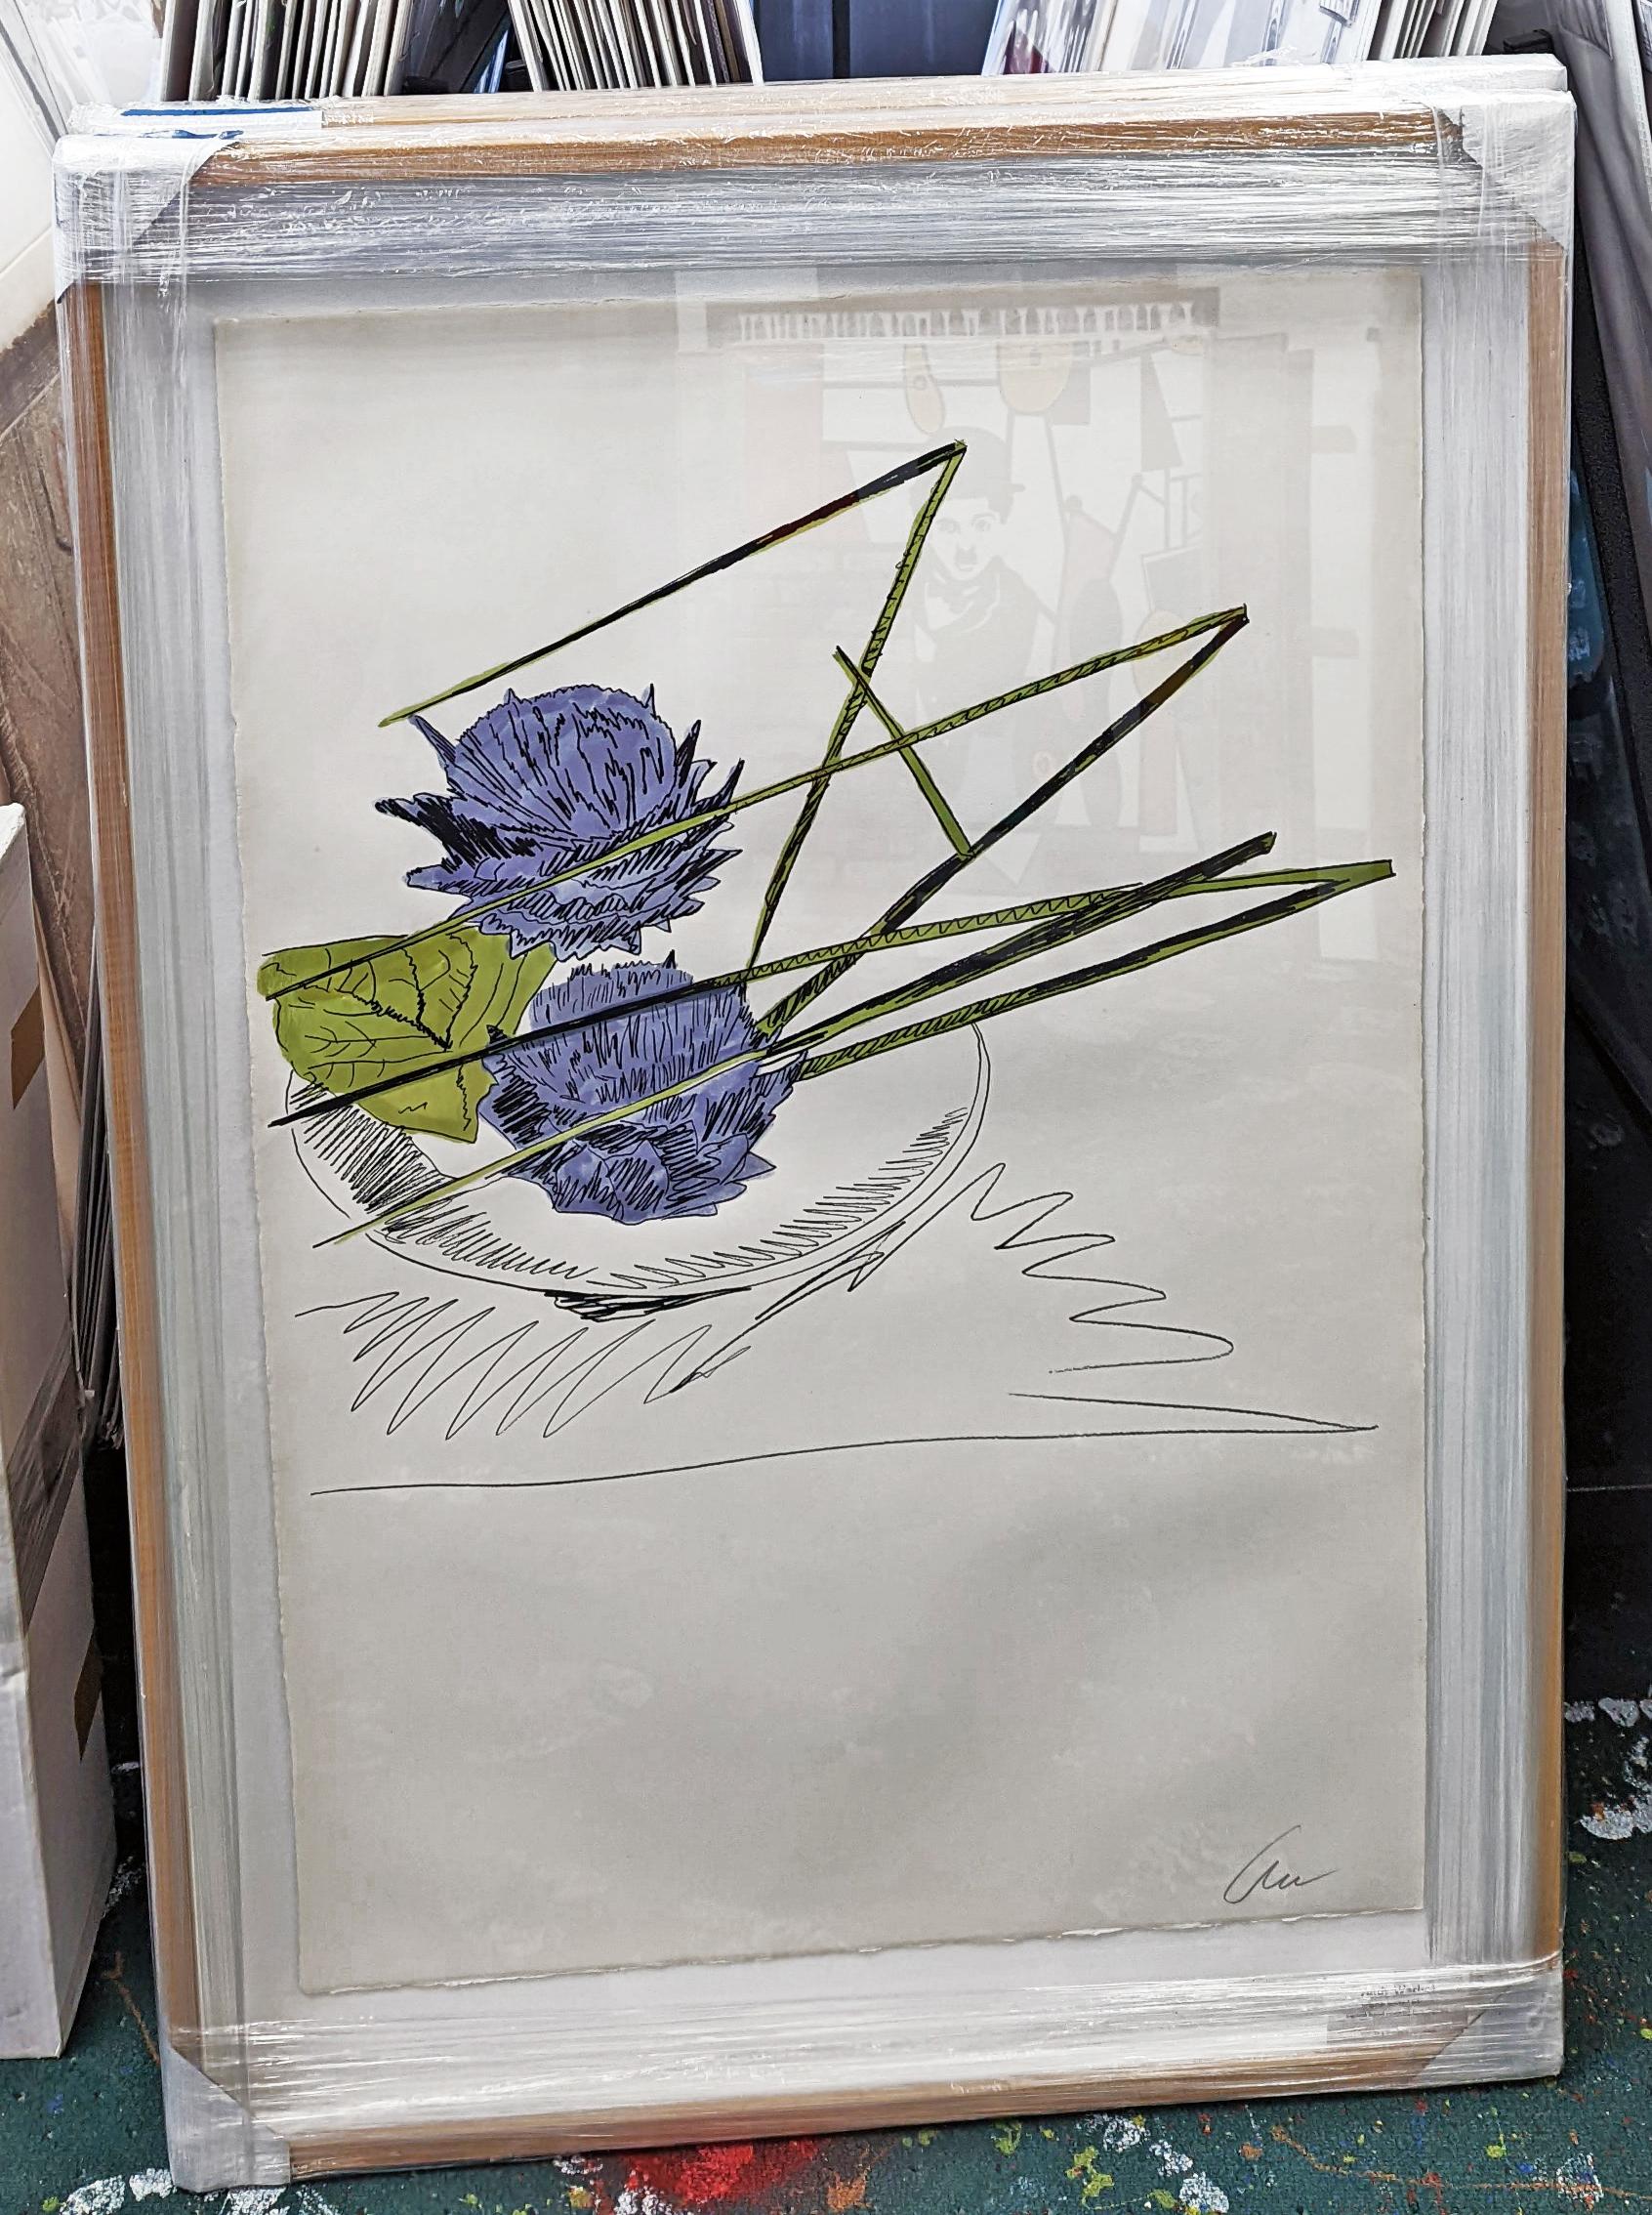 FLOWERS FS II.116 (HAND COLORED) - Print by Andy Warhol